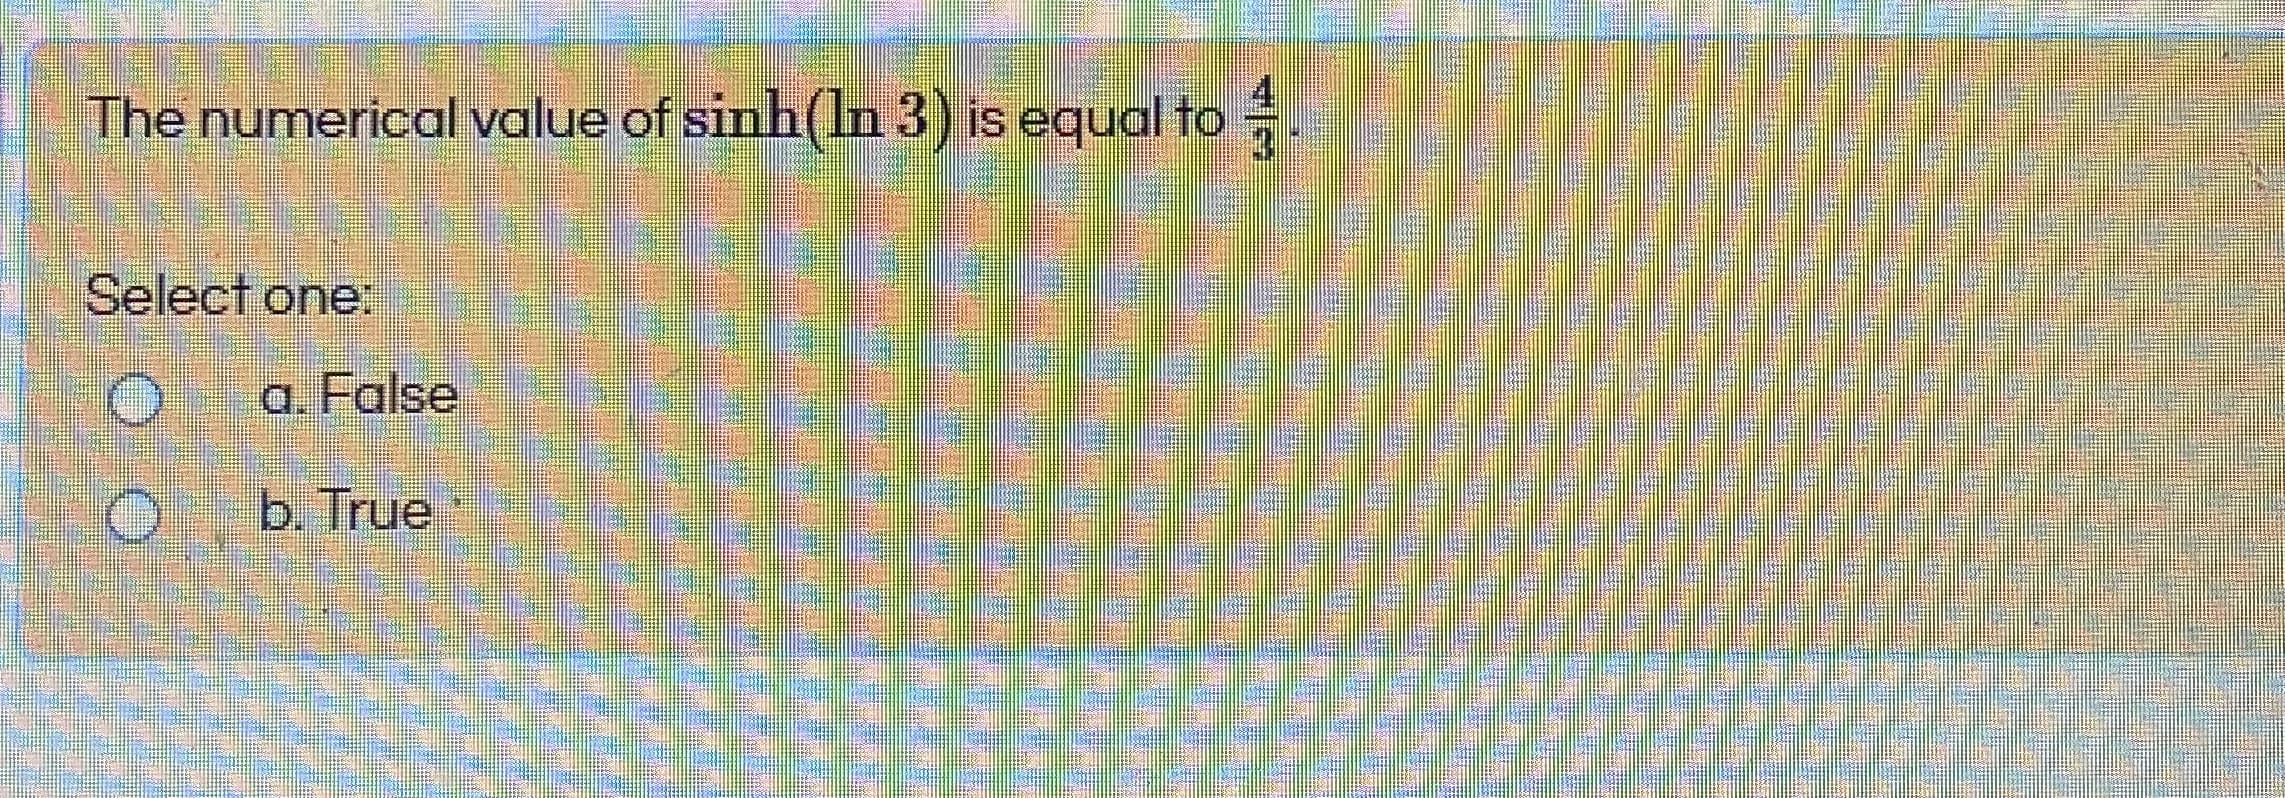 The numerical value of sinh(n 3) is equal to
Select one:
a. False
O b. True
